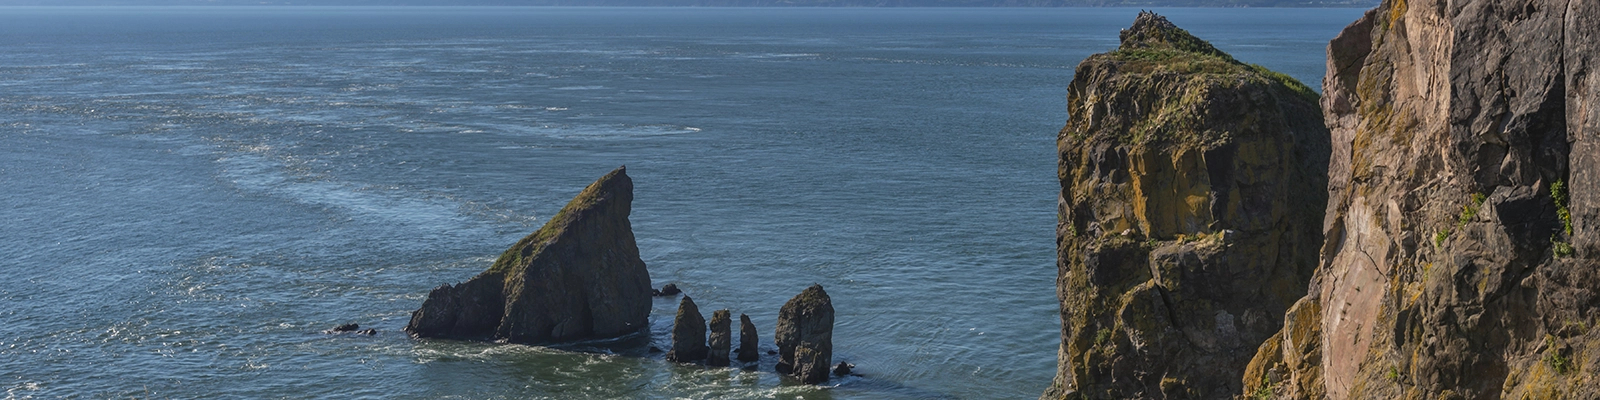 Scenic view of Cape Split, a lush coastal headland with stunning cliffs and blue ocean waves